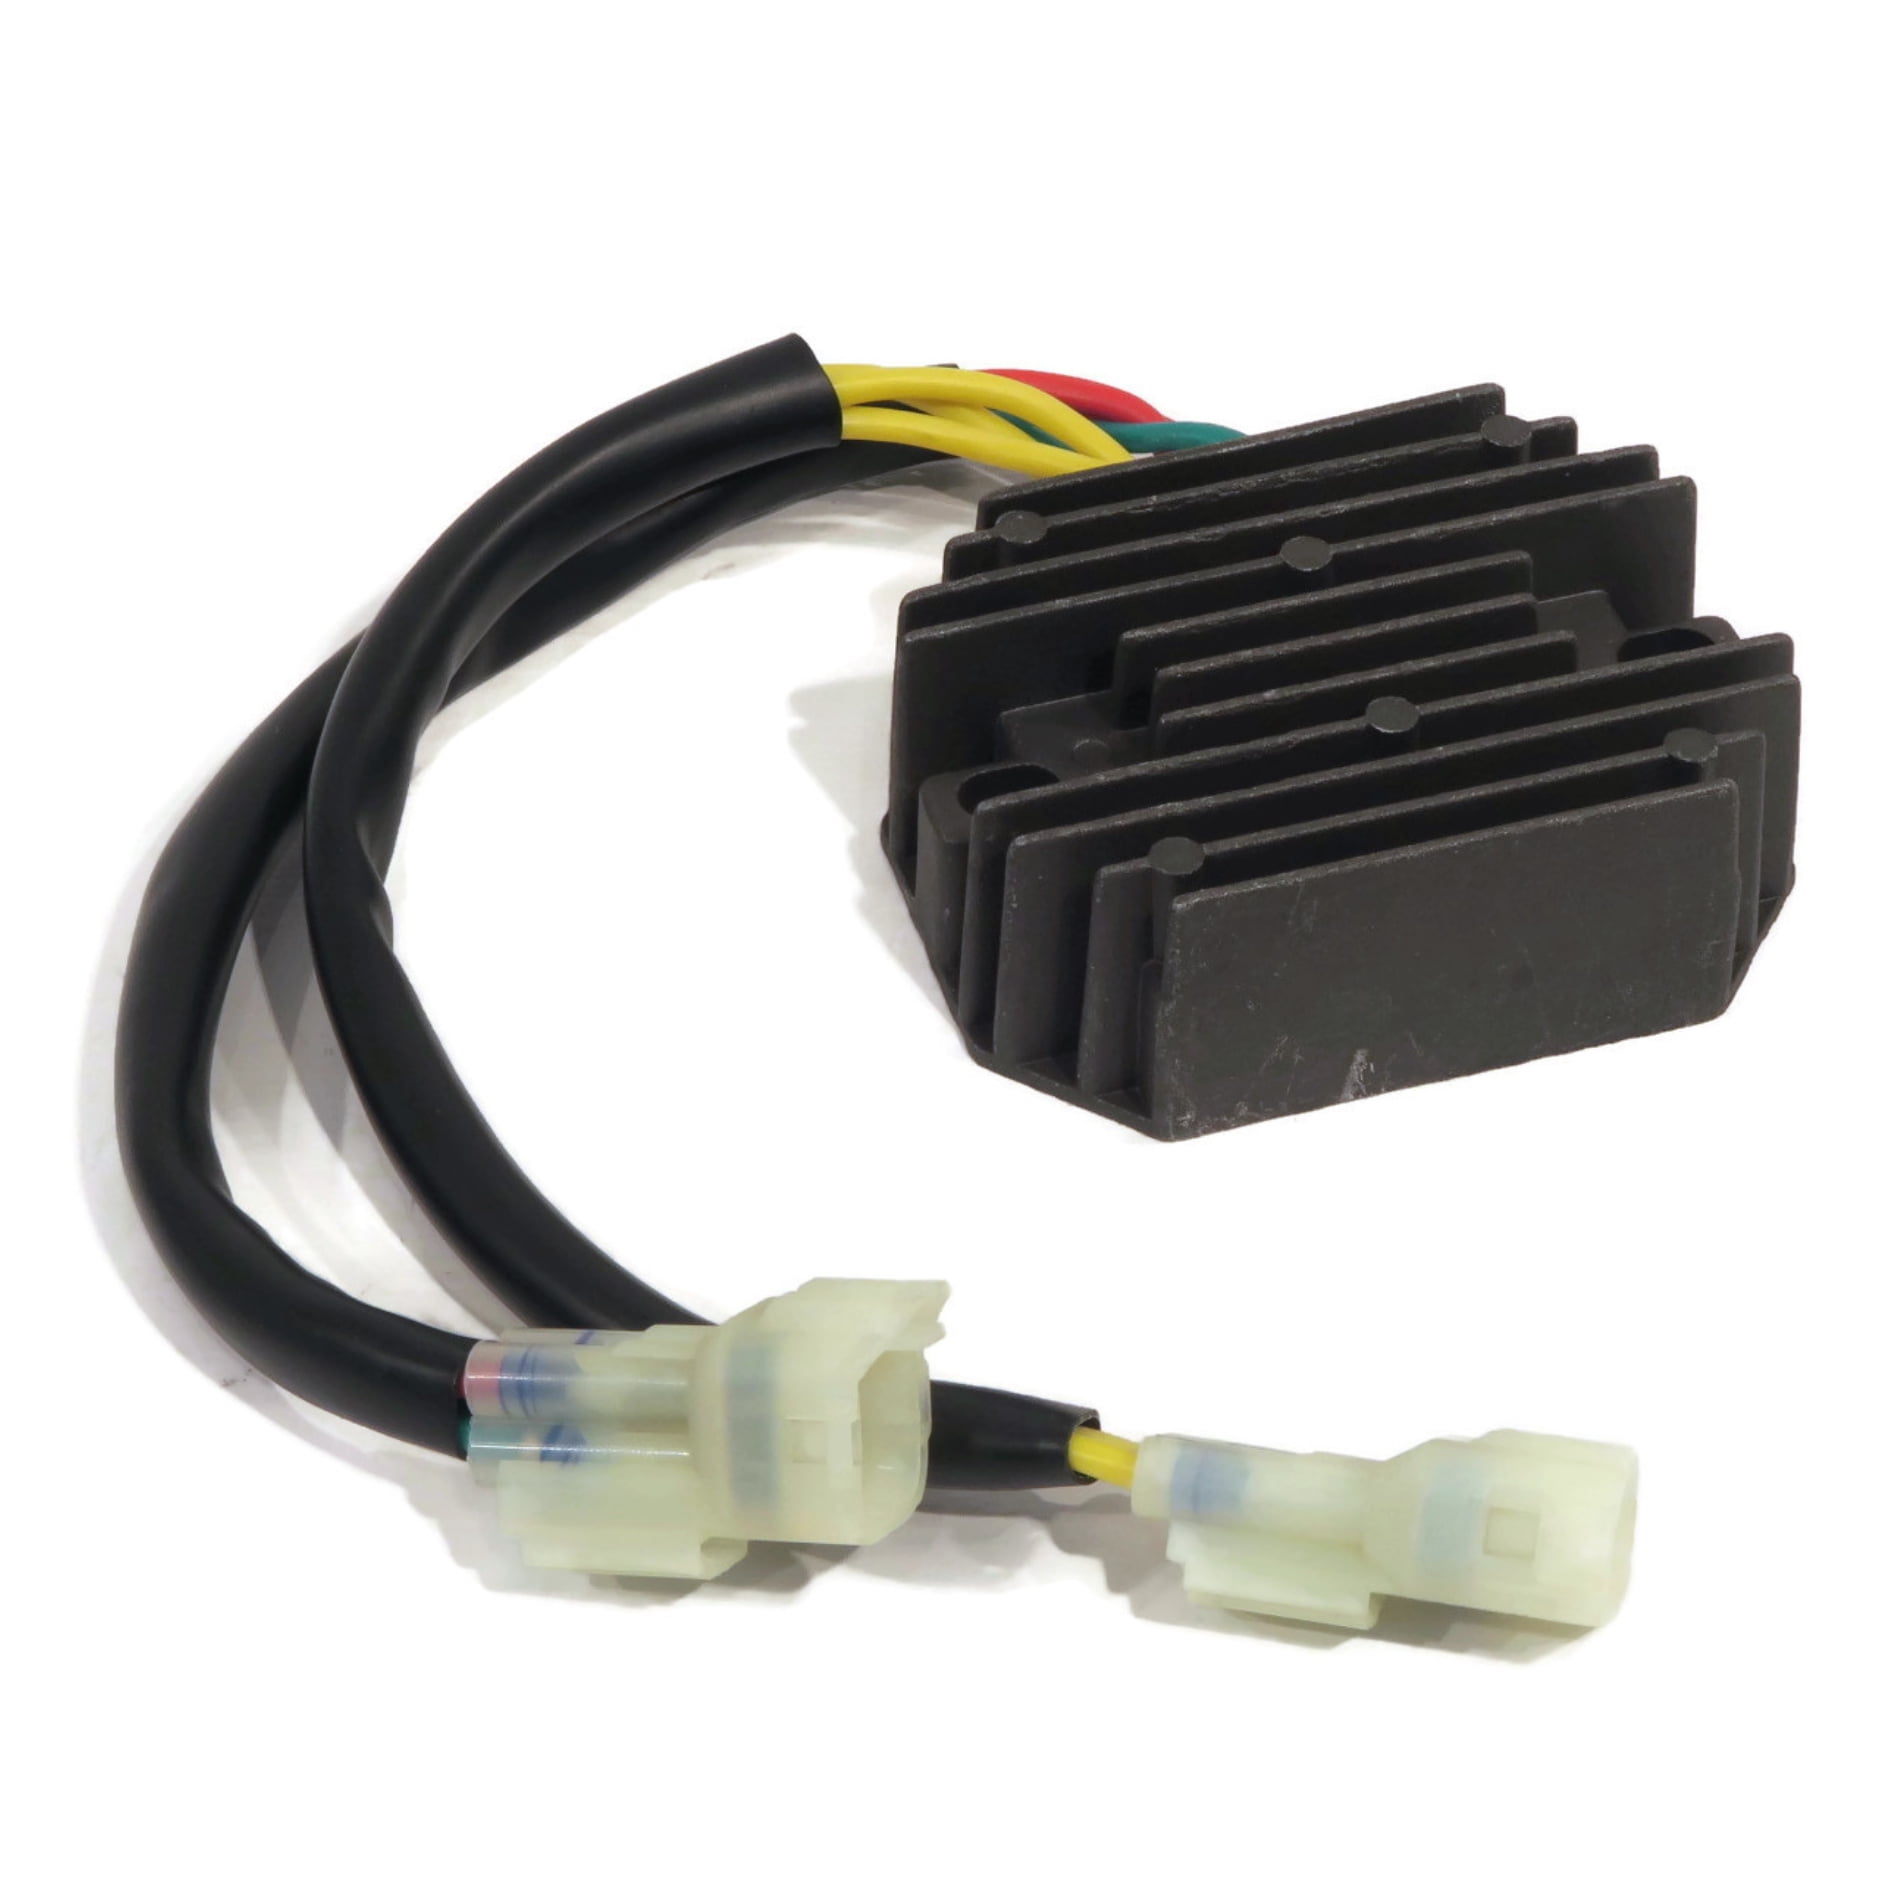 VOLTAGE REGULATOR RECTIFIER fit Polaris Outlaw 2008-2010 450 & 2007-2011 525 ATV by The ROP Shop 